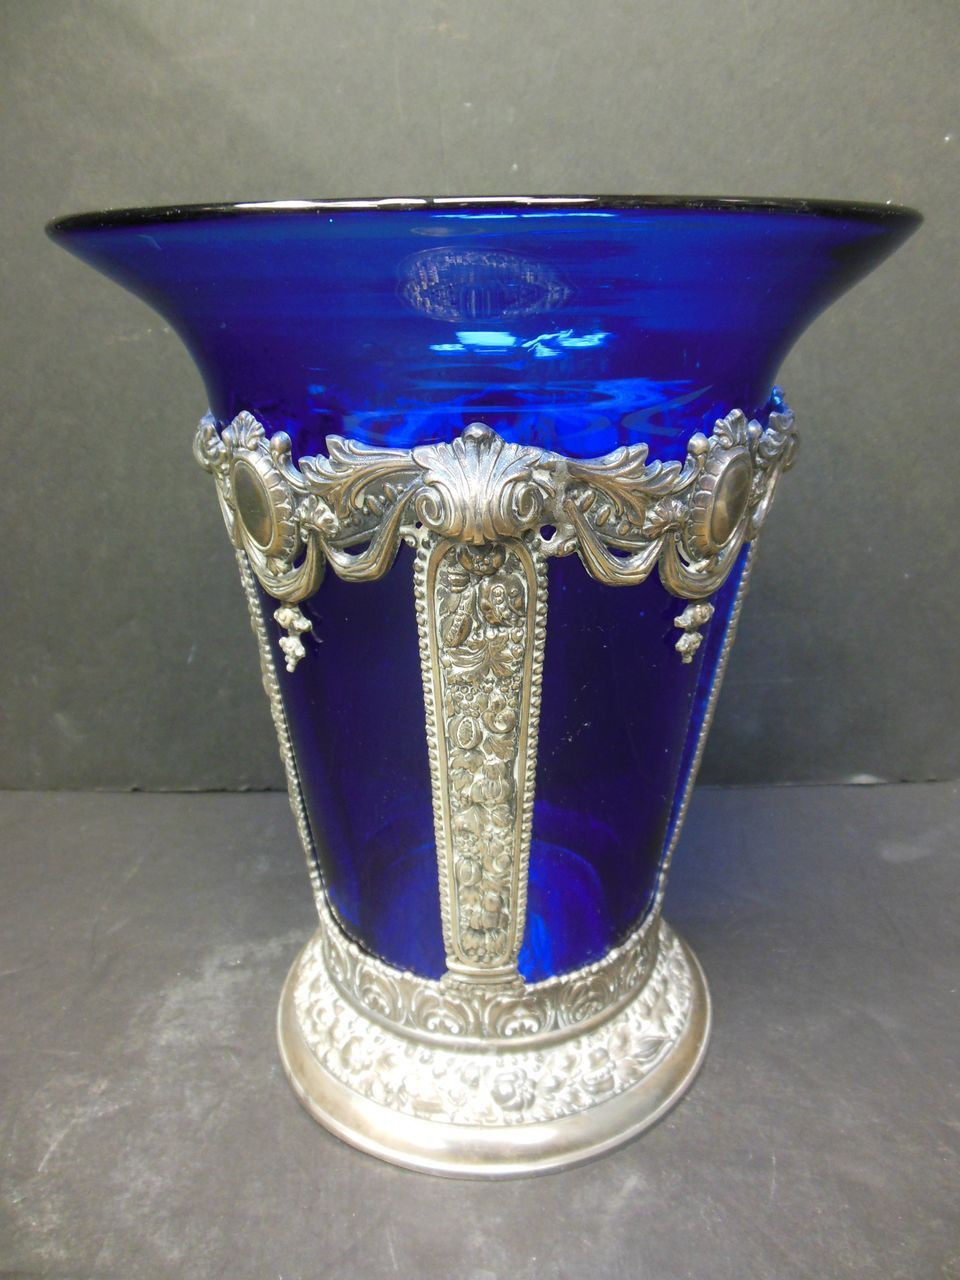 21 Great Red and Yellow Glass Vase 2023 free download red and yellow glass vase of light blue glass vase pictures bunch od red and yellow tulips with in light blue glass vase images victorian blue glass vase with silver plated holder of light b